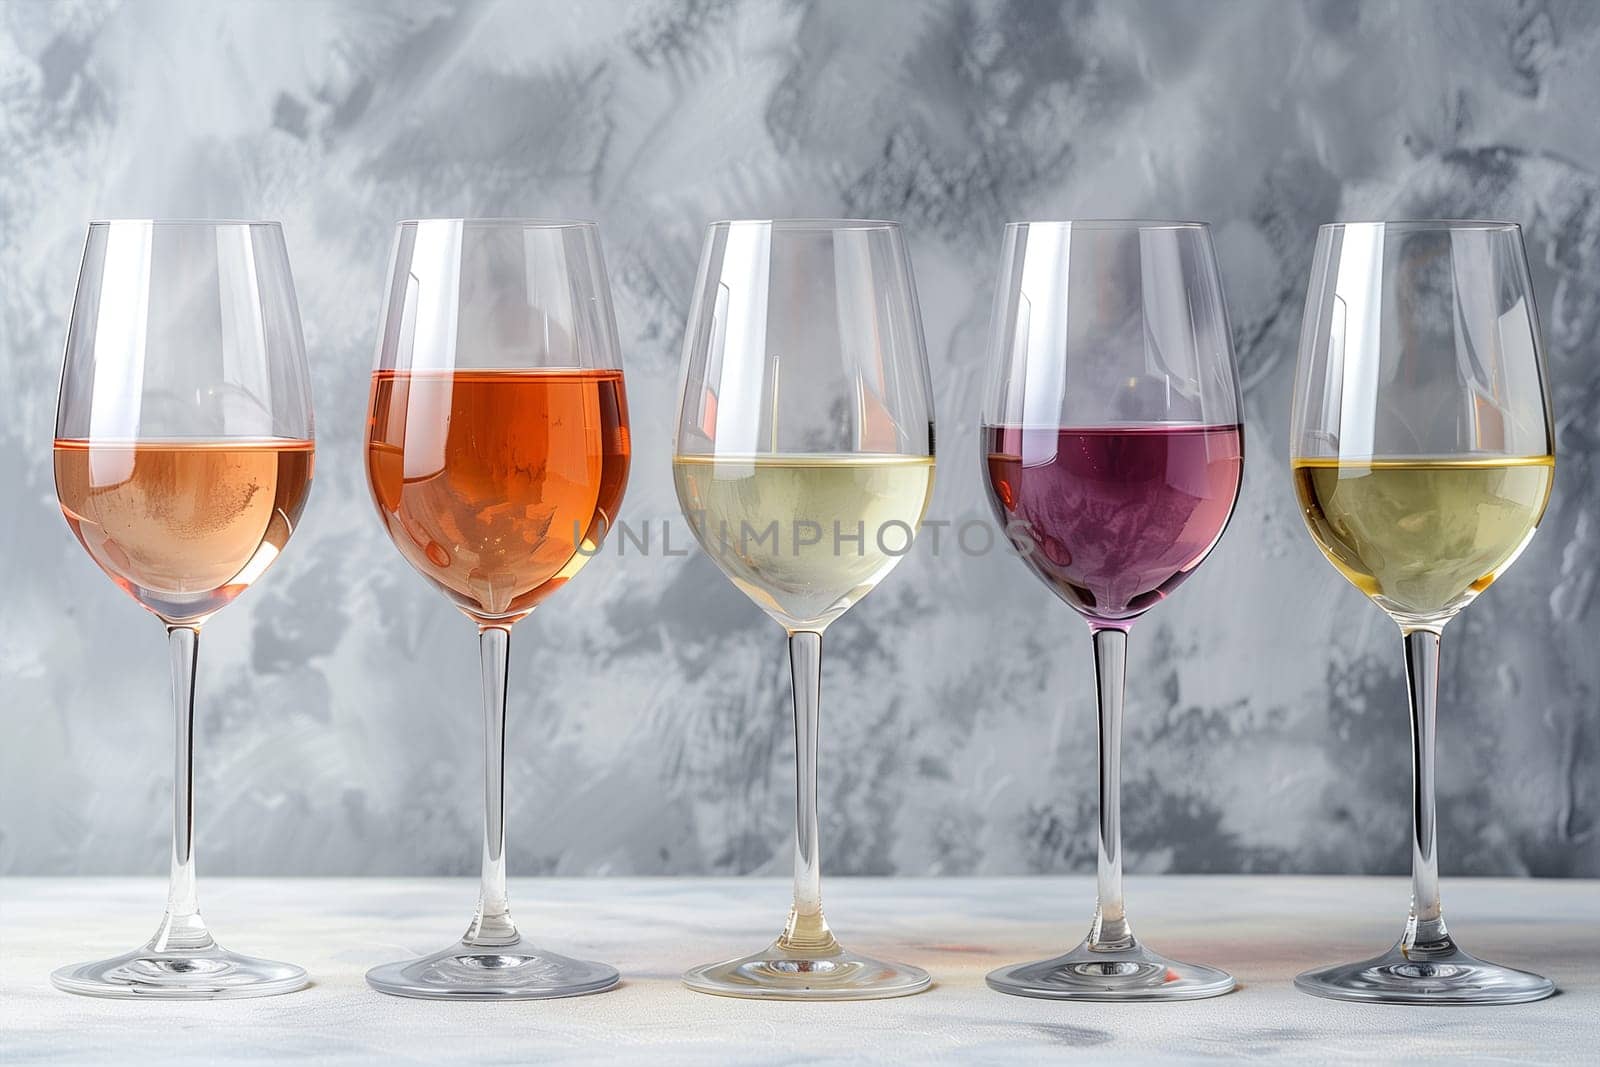 A variety of differently colored wine glasses neatly arranged in a row on a table, ready for a wine festival event.